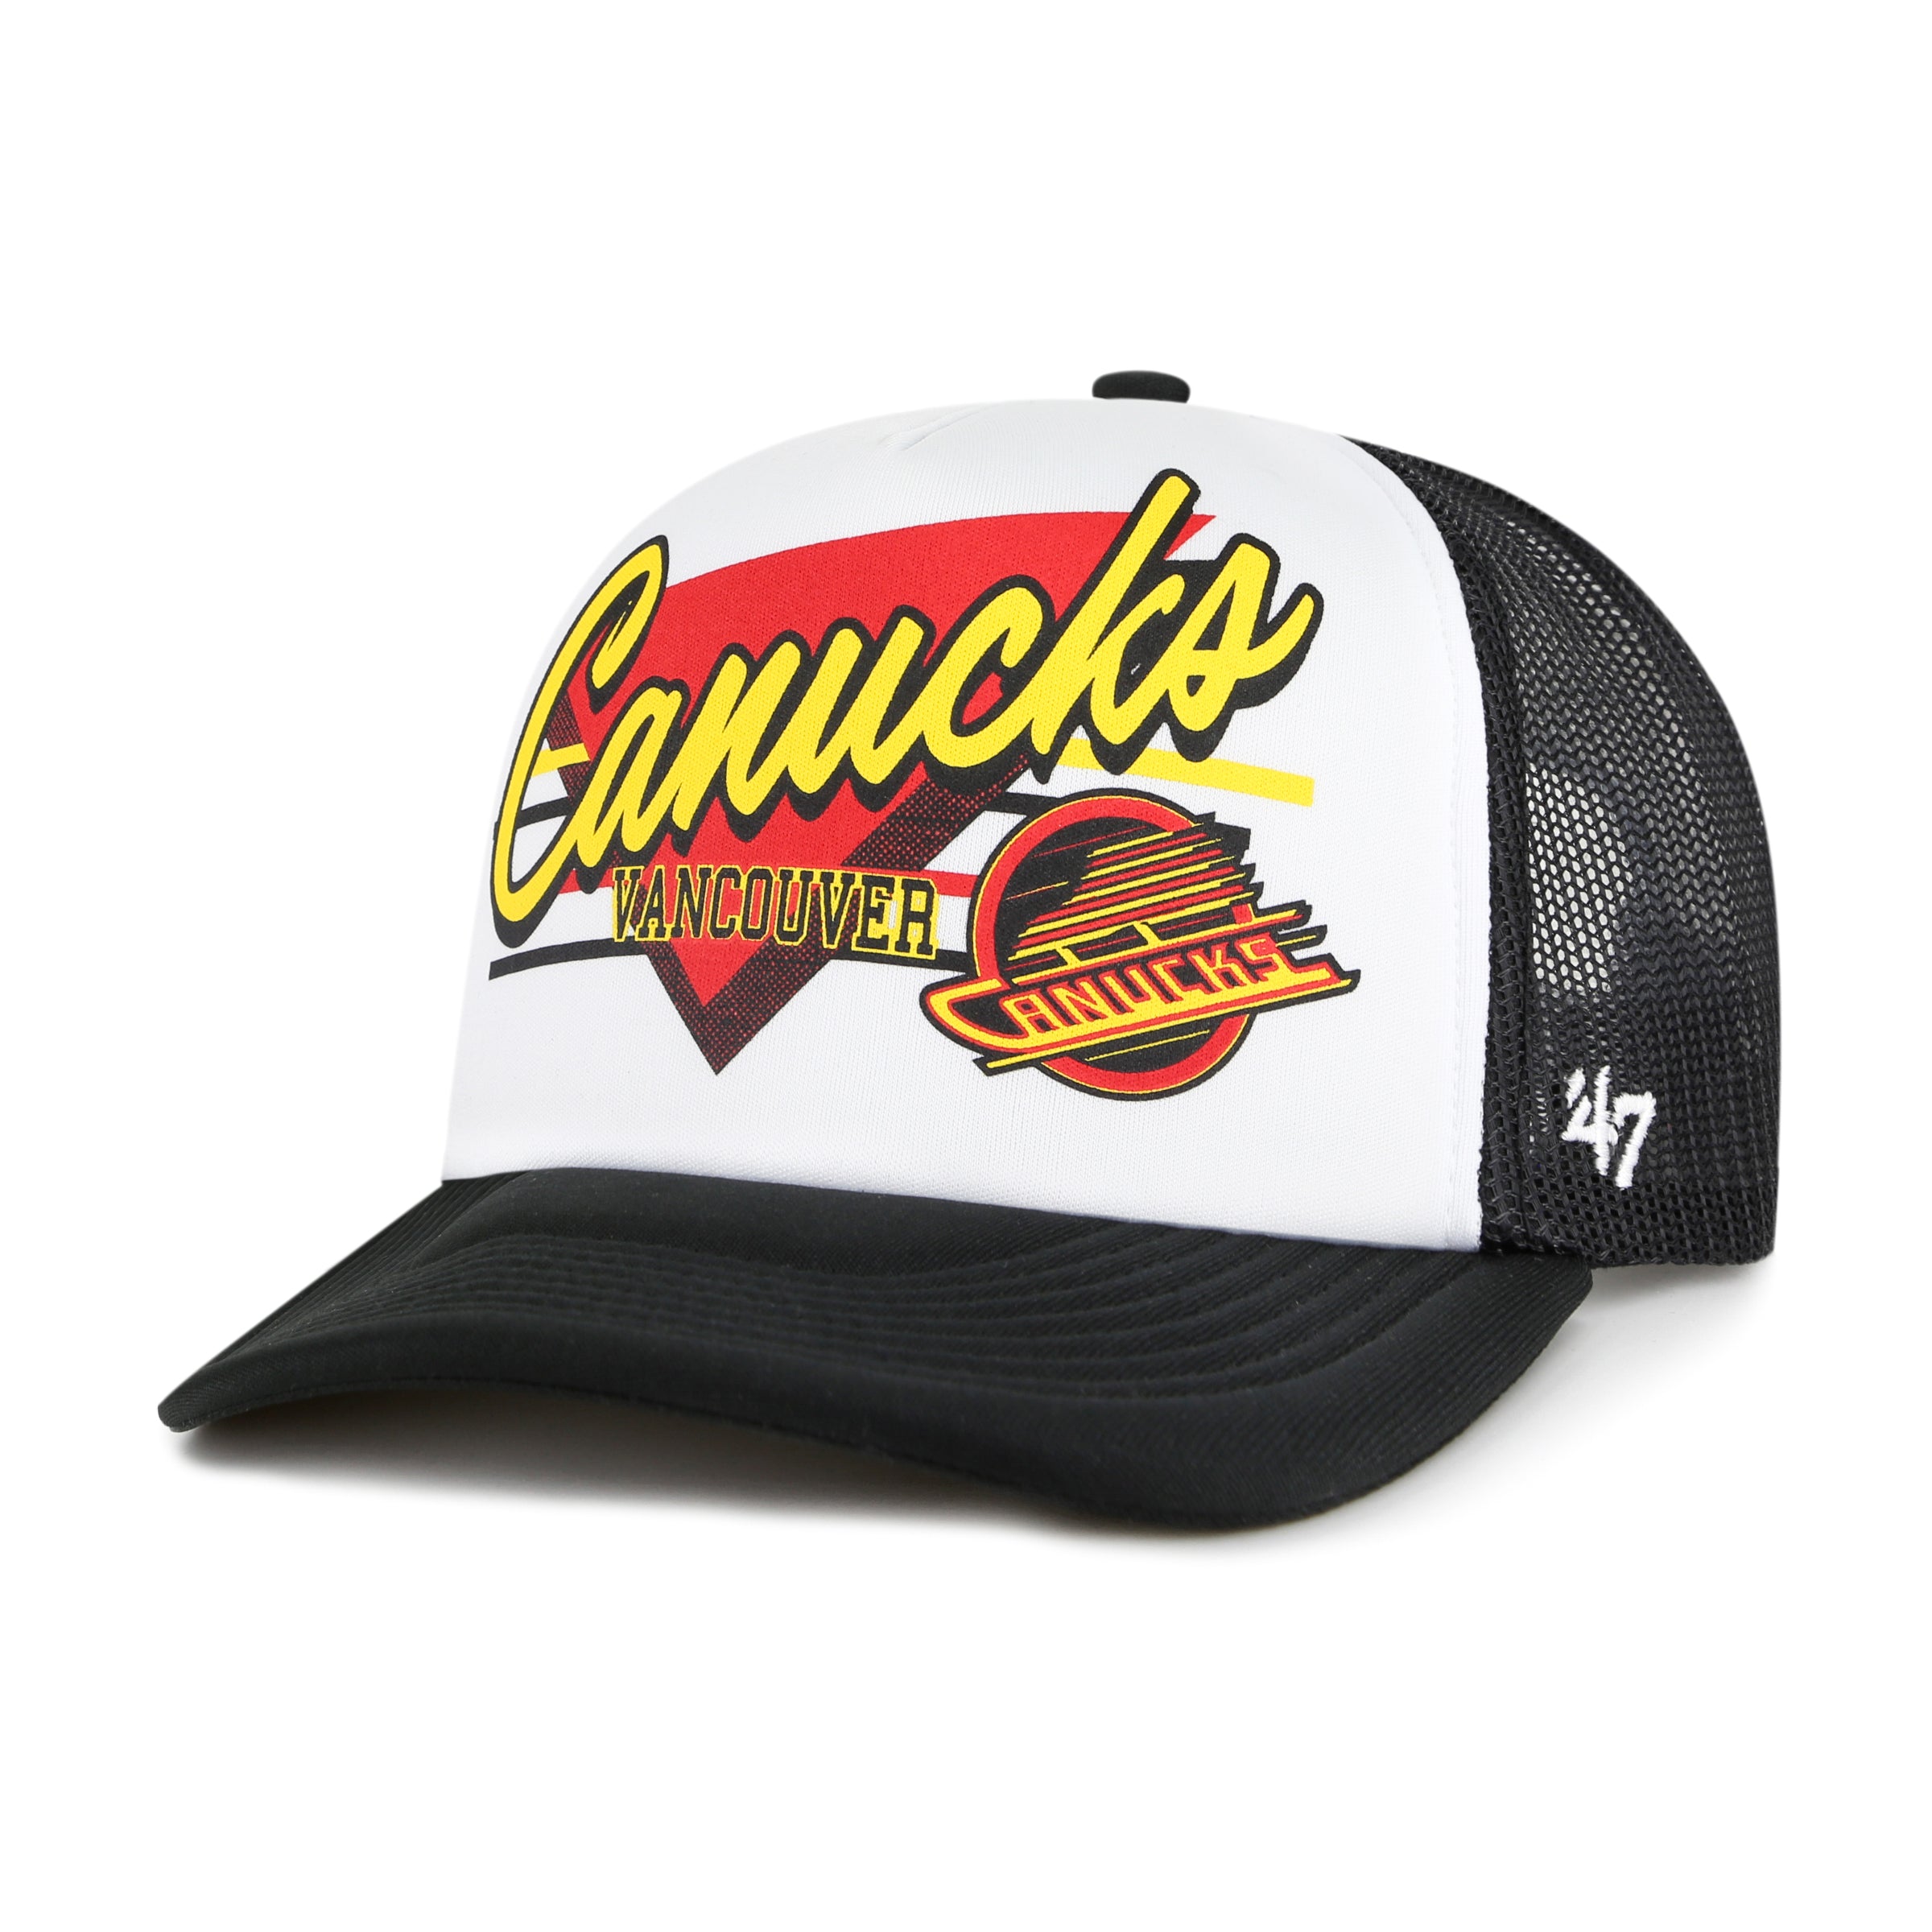 Vancouver Canucks Hang Out '47 TRUCKER